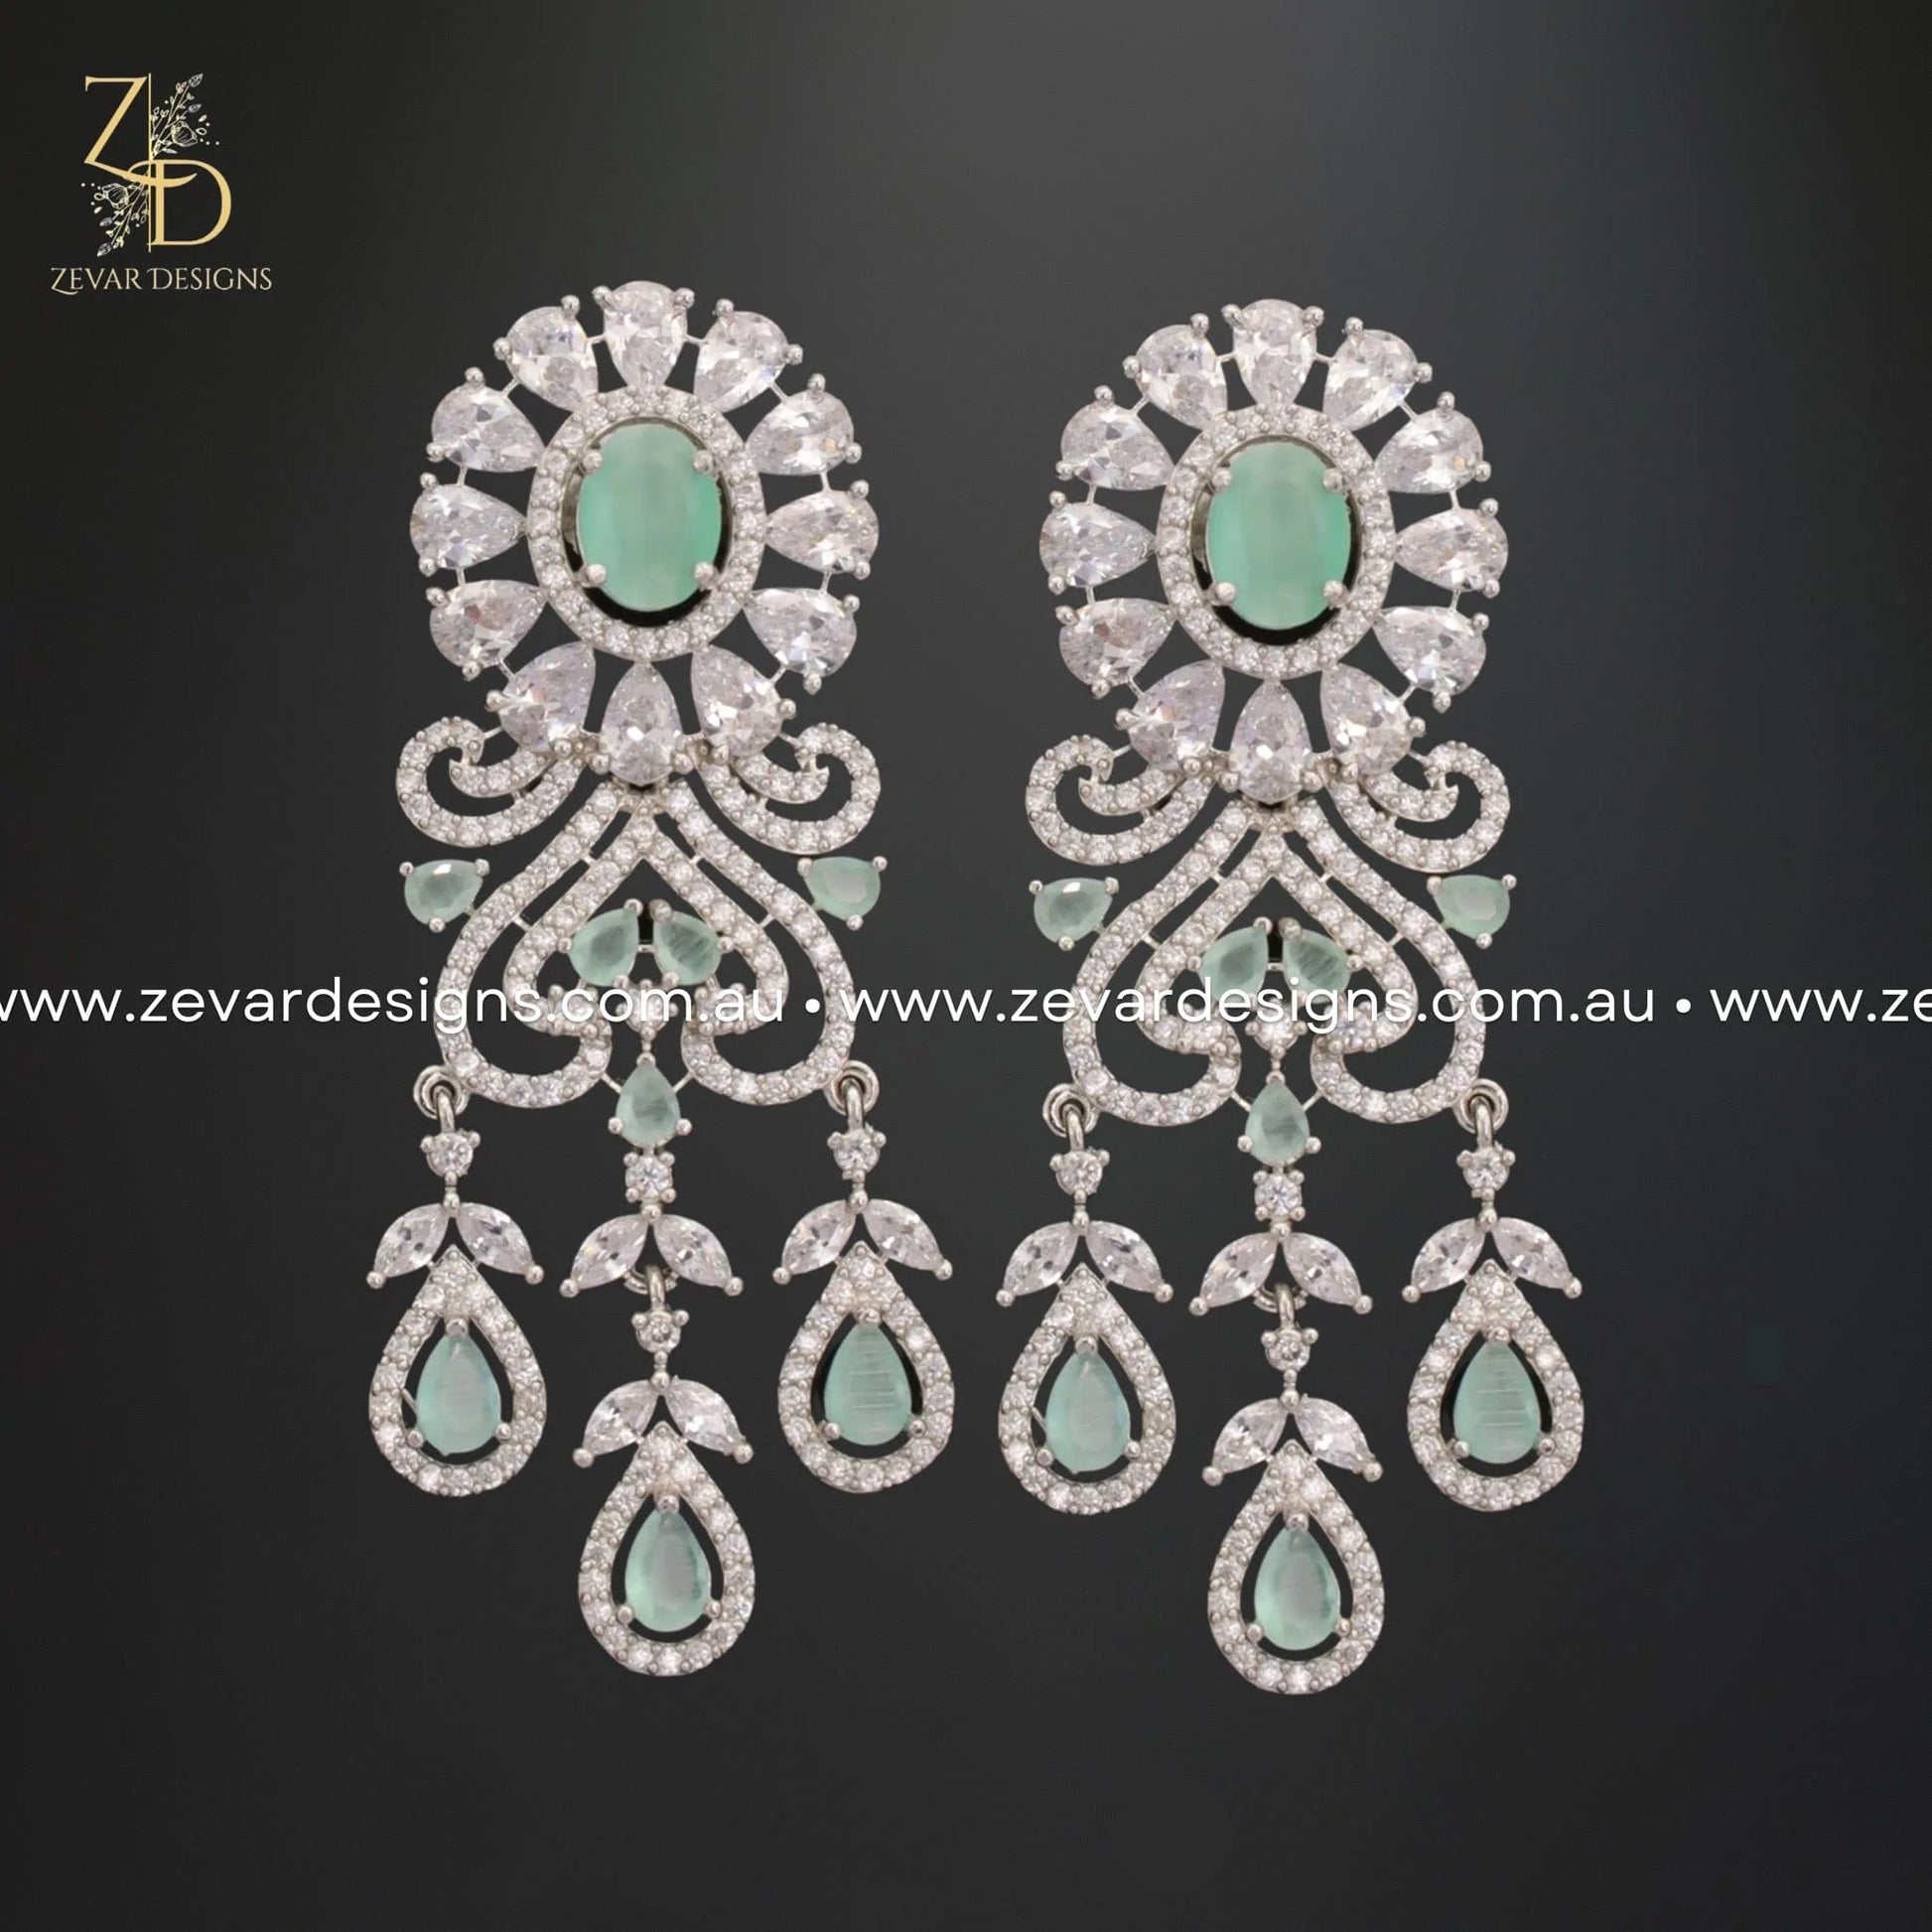 Zevar Designs Necklace Sets - AD AD/Zircon Choker in Mint and White Rhodium